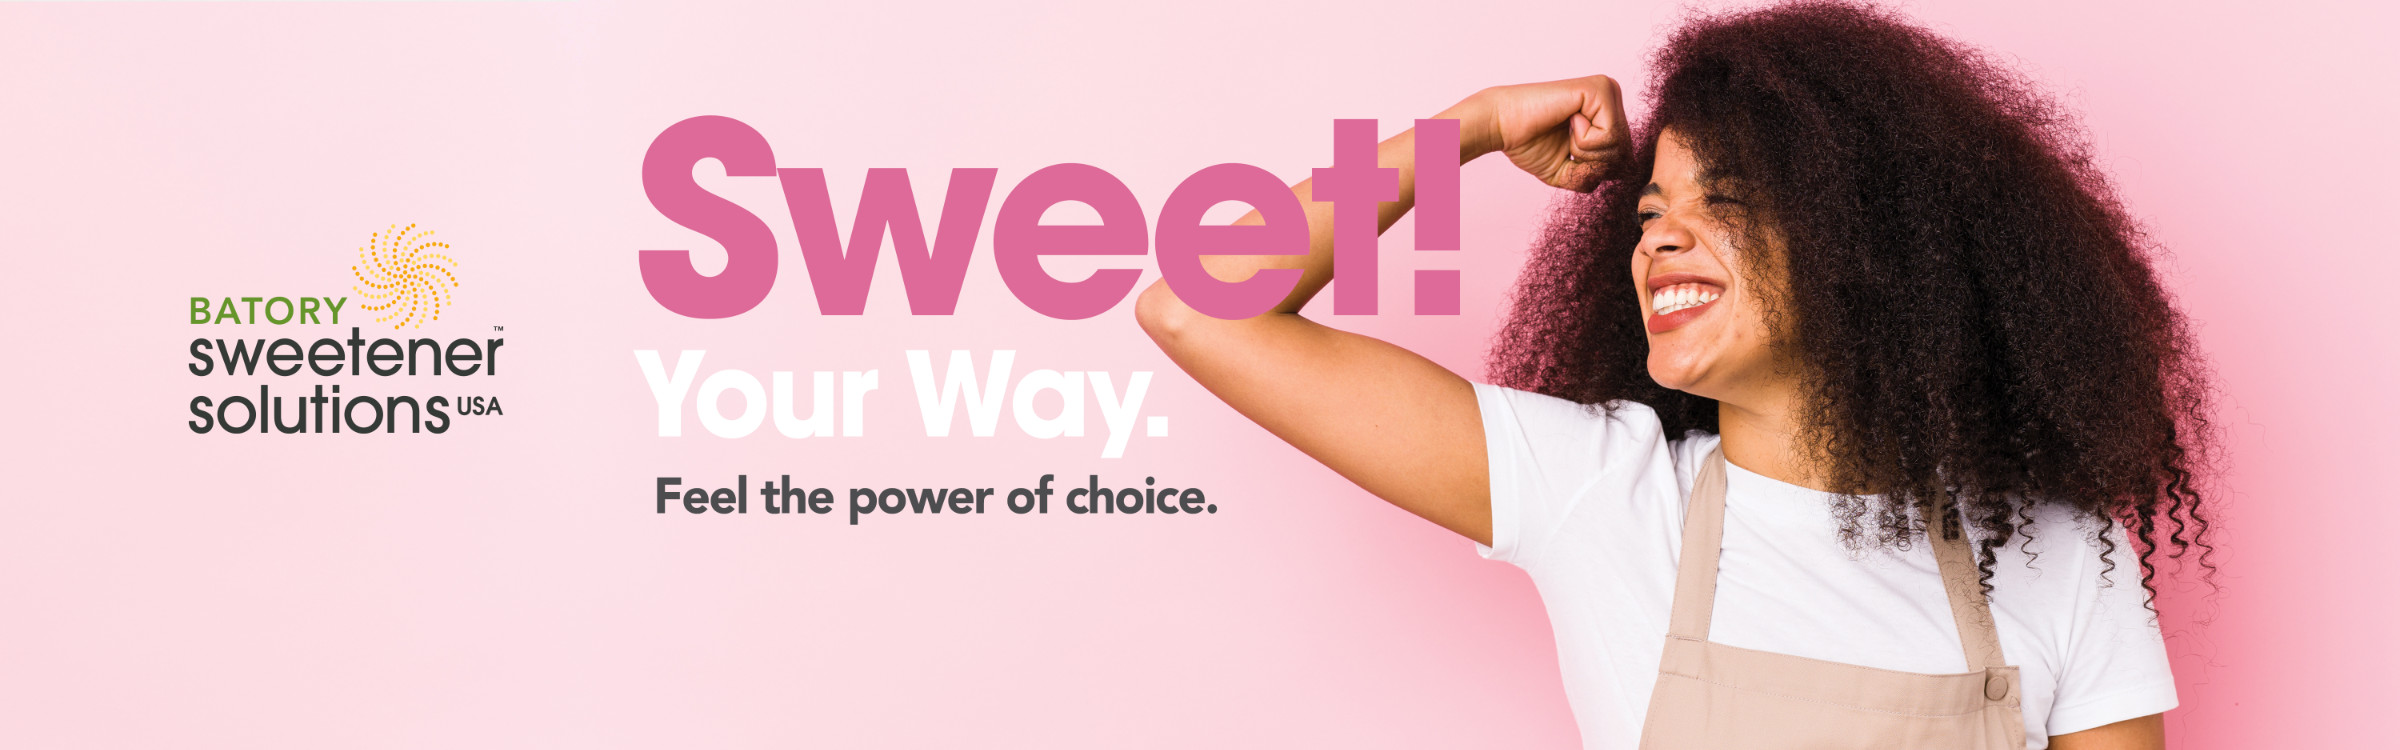 Batory Sweetener Solutions - Sweet! Your Way. Feel the power of choice.